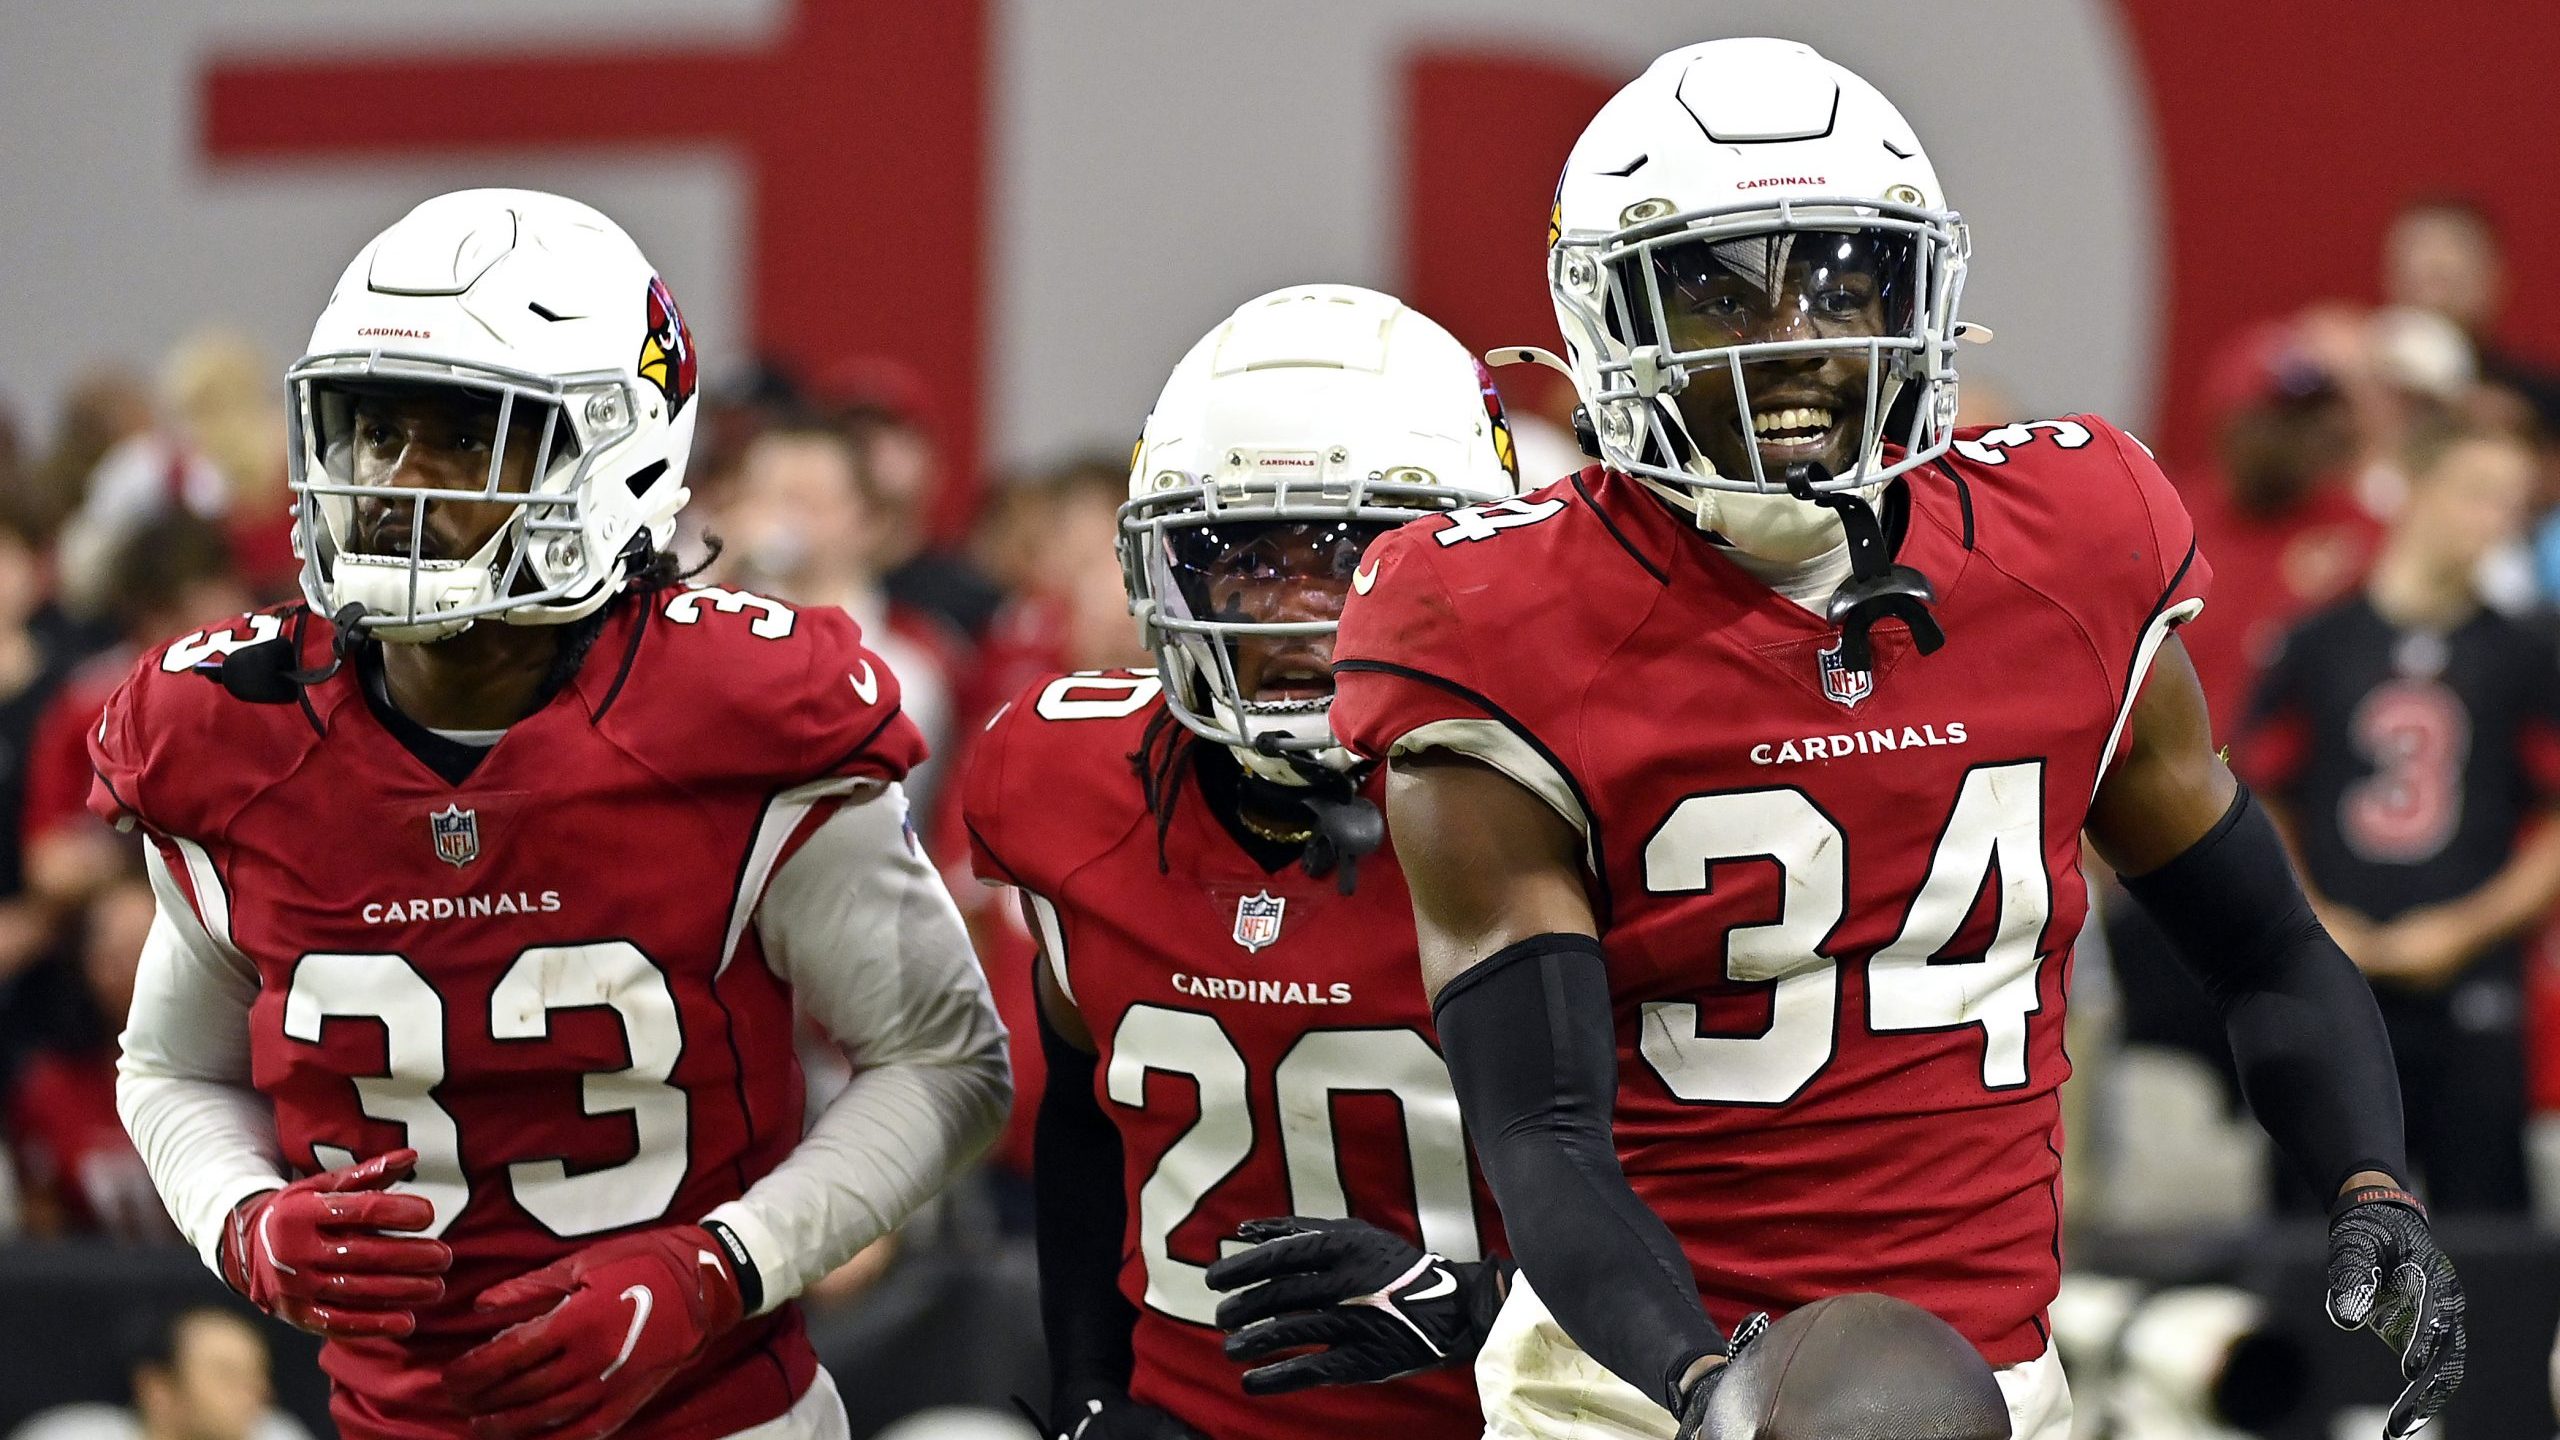 Jalen Thompson #34 of the Arizona Cardinals looks on after making an interception against the Carol...